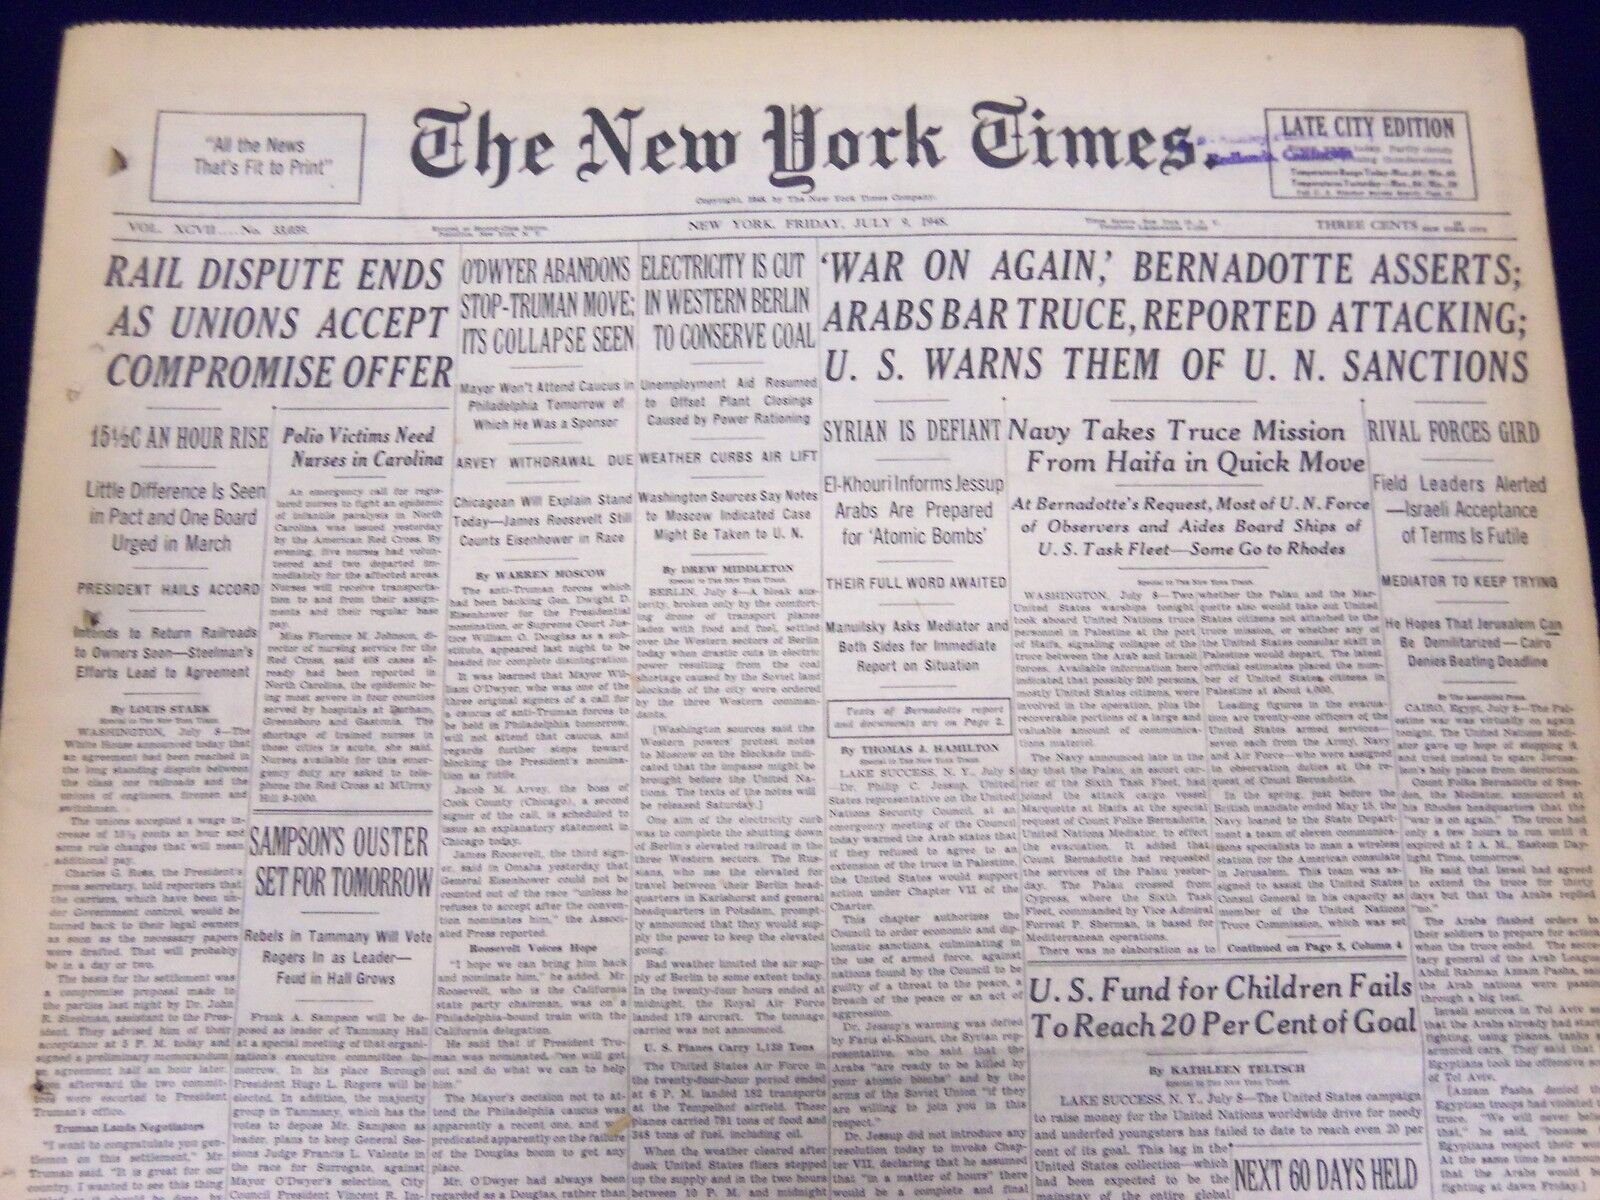 1948 JULY 9 NEW YORK TIMES NEWSPAPER - RAIL DISPUTES ENDS UNION ACCEPTS - NT 62